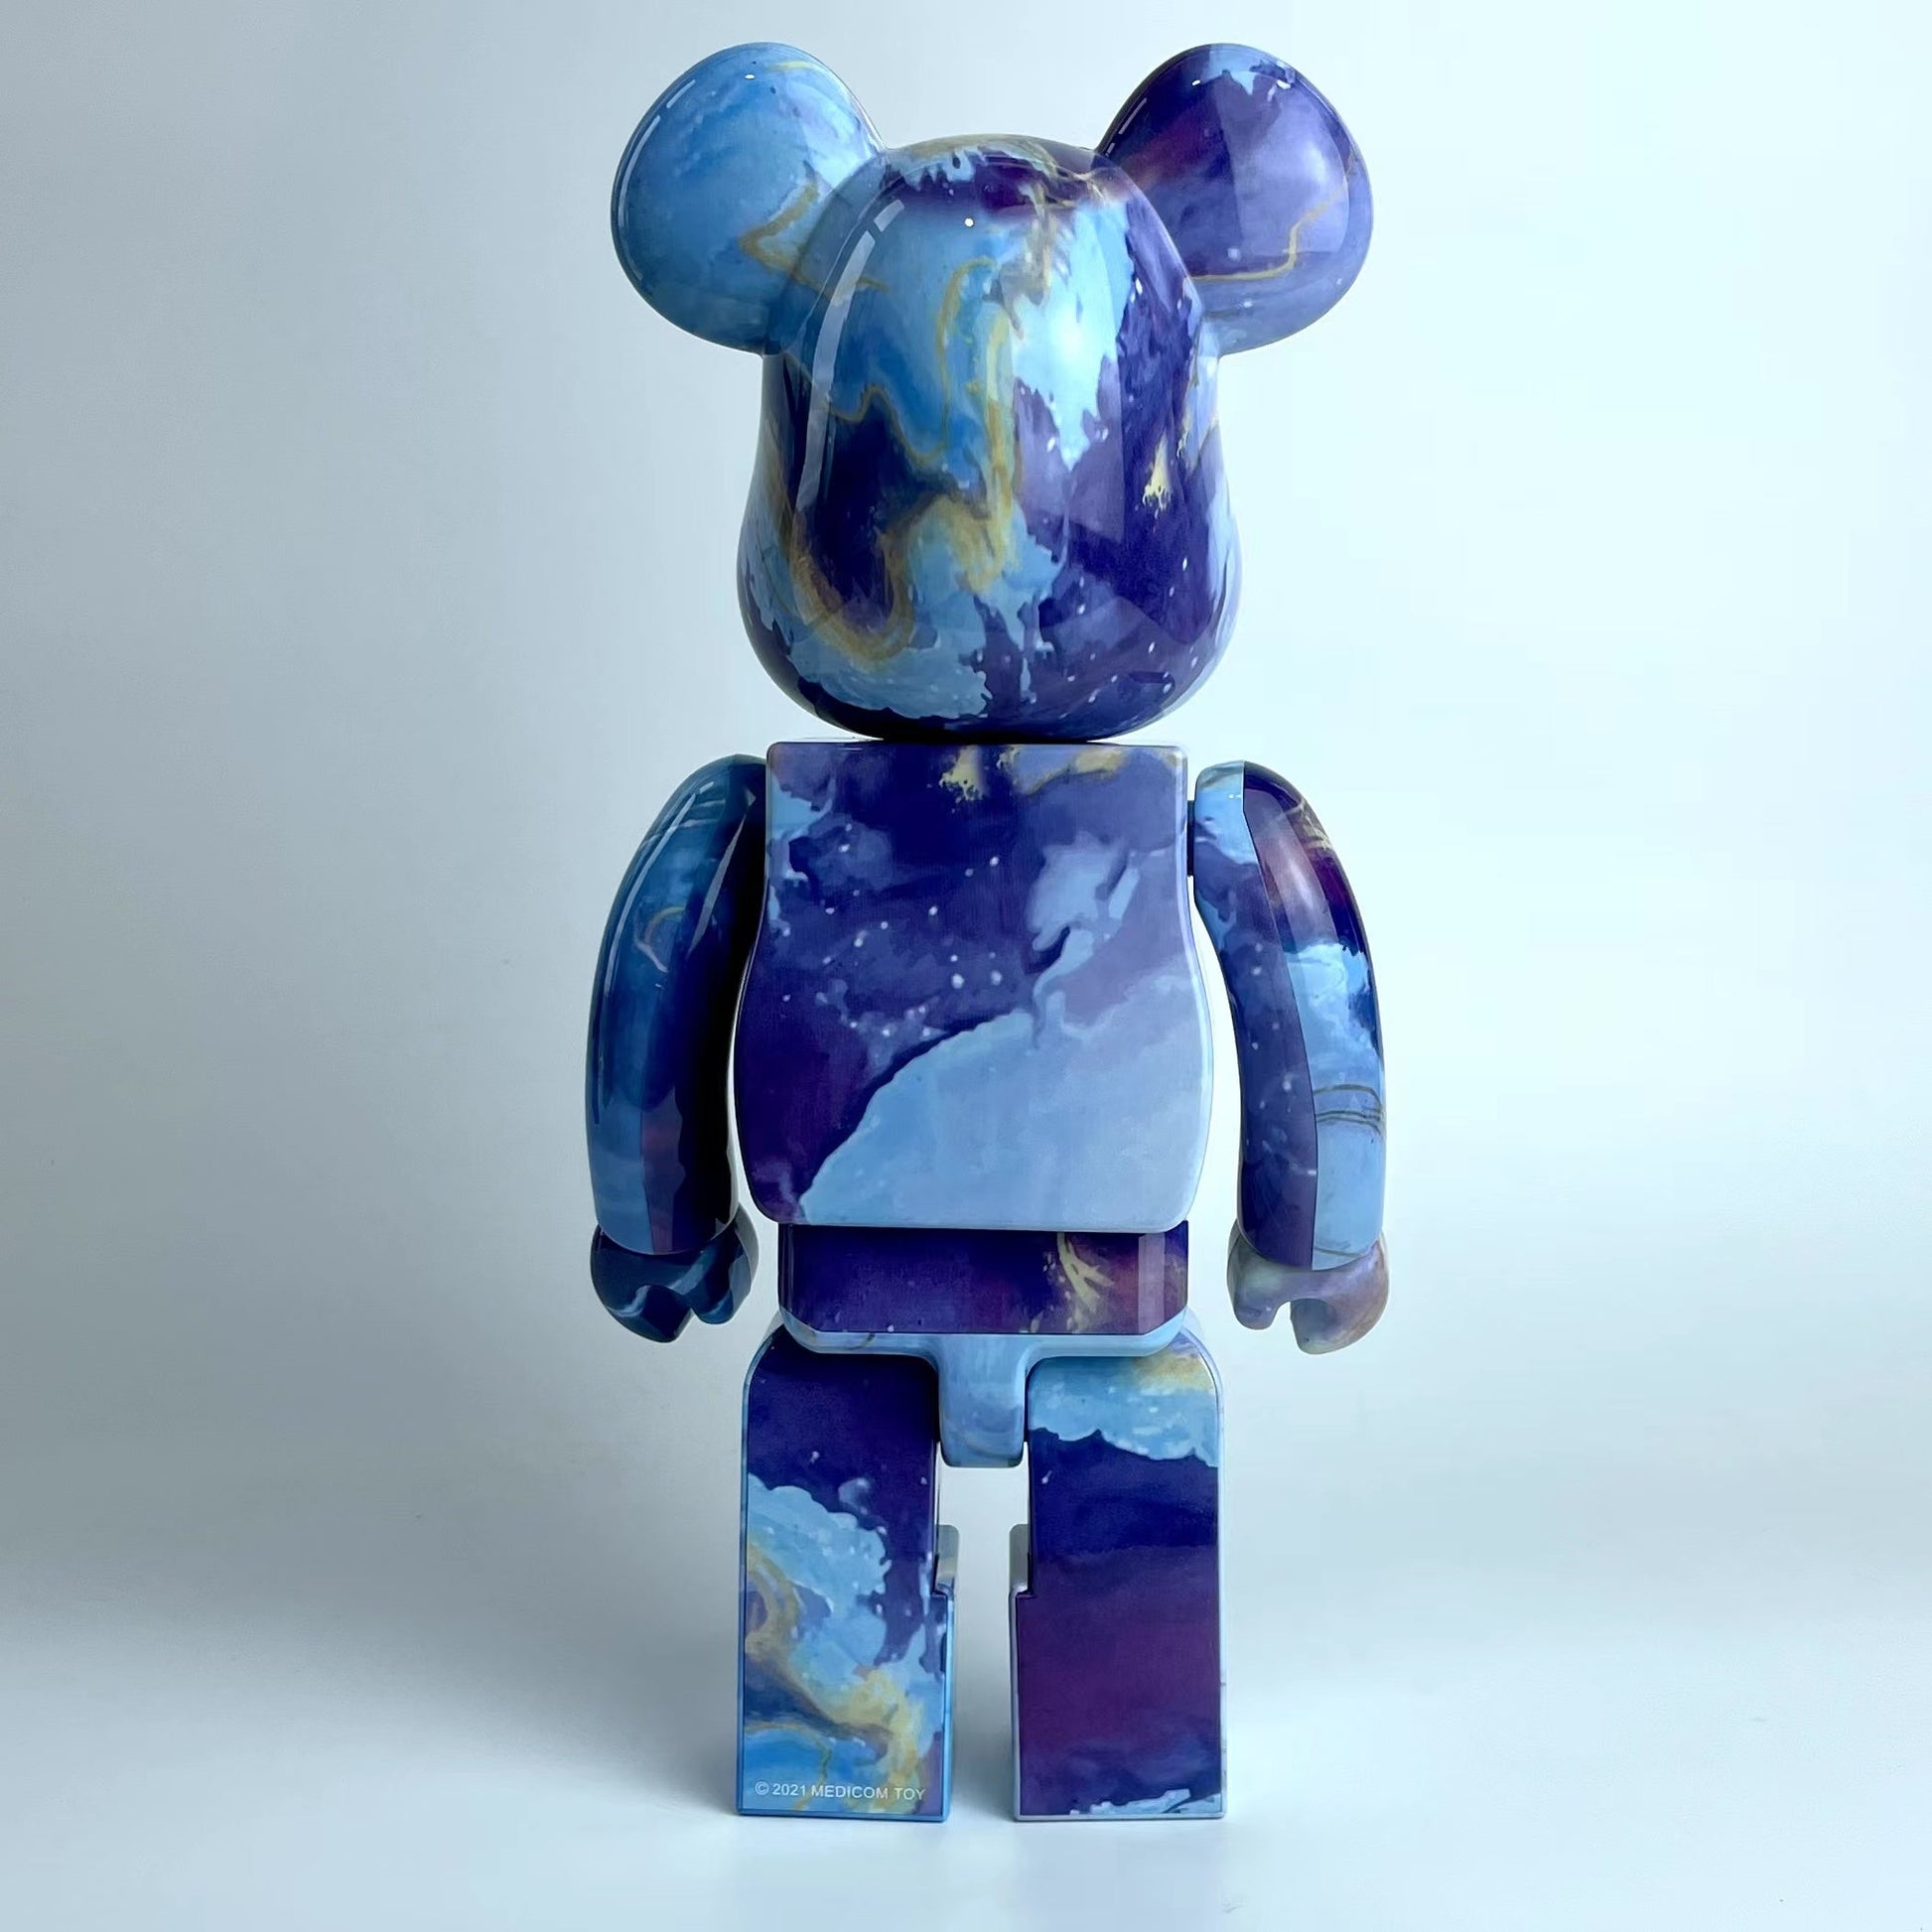 Toy - 28cm BEARBRICK 400% Marble ABS Action Figure Boxed